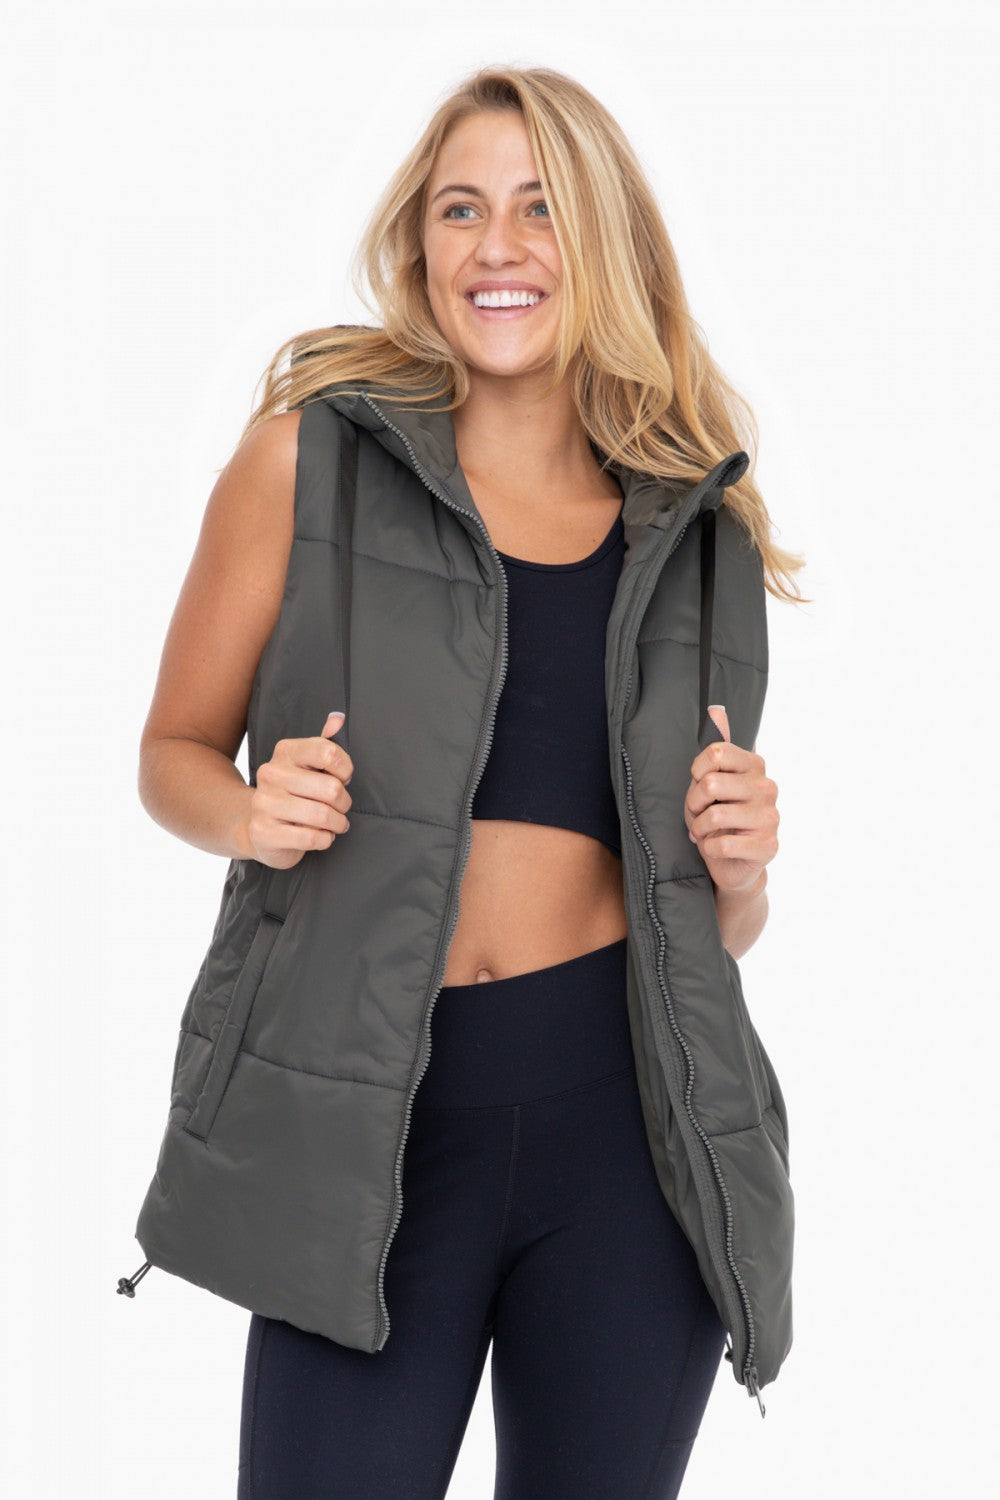 What to Wear with a Hooded Puffer Vest?